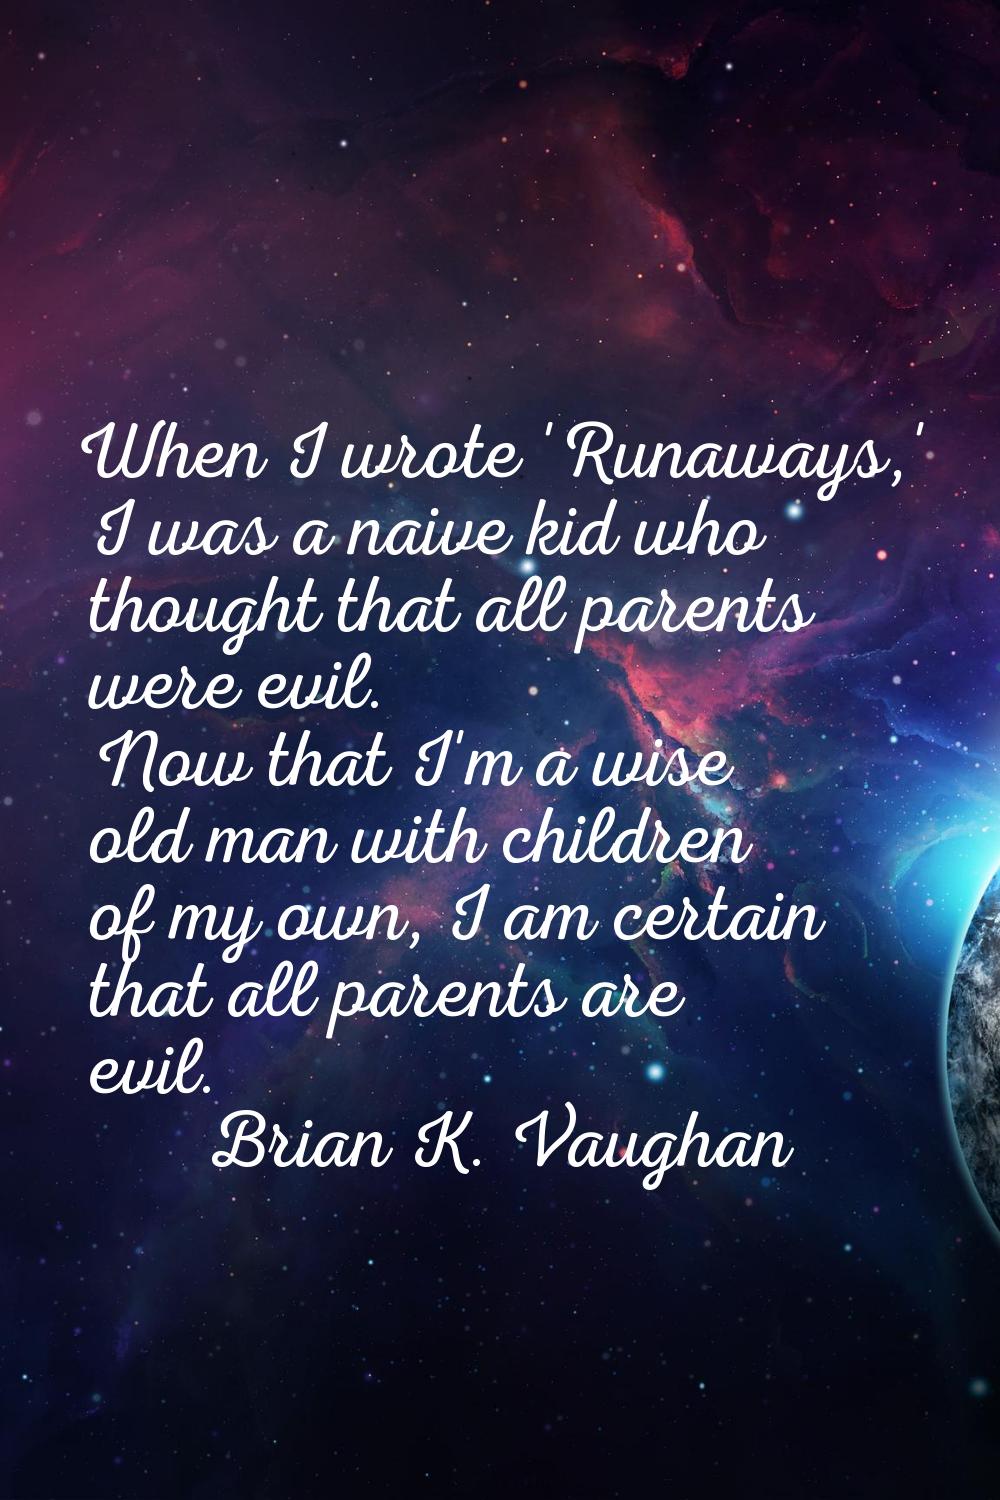 When I wrote 'Runaways,' I was a naive kid who thought that all parents were evil. Now that I'm a w